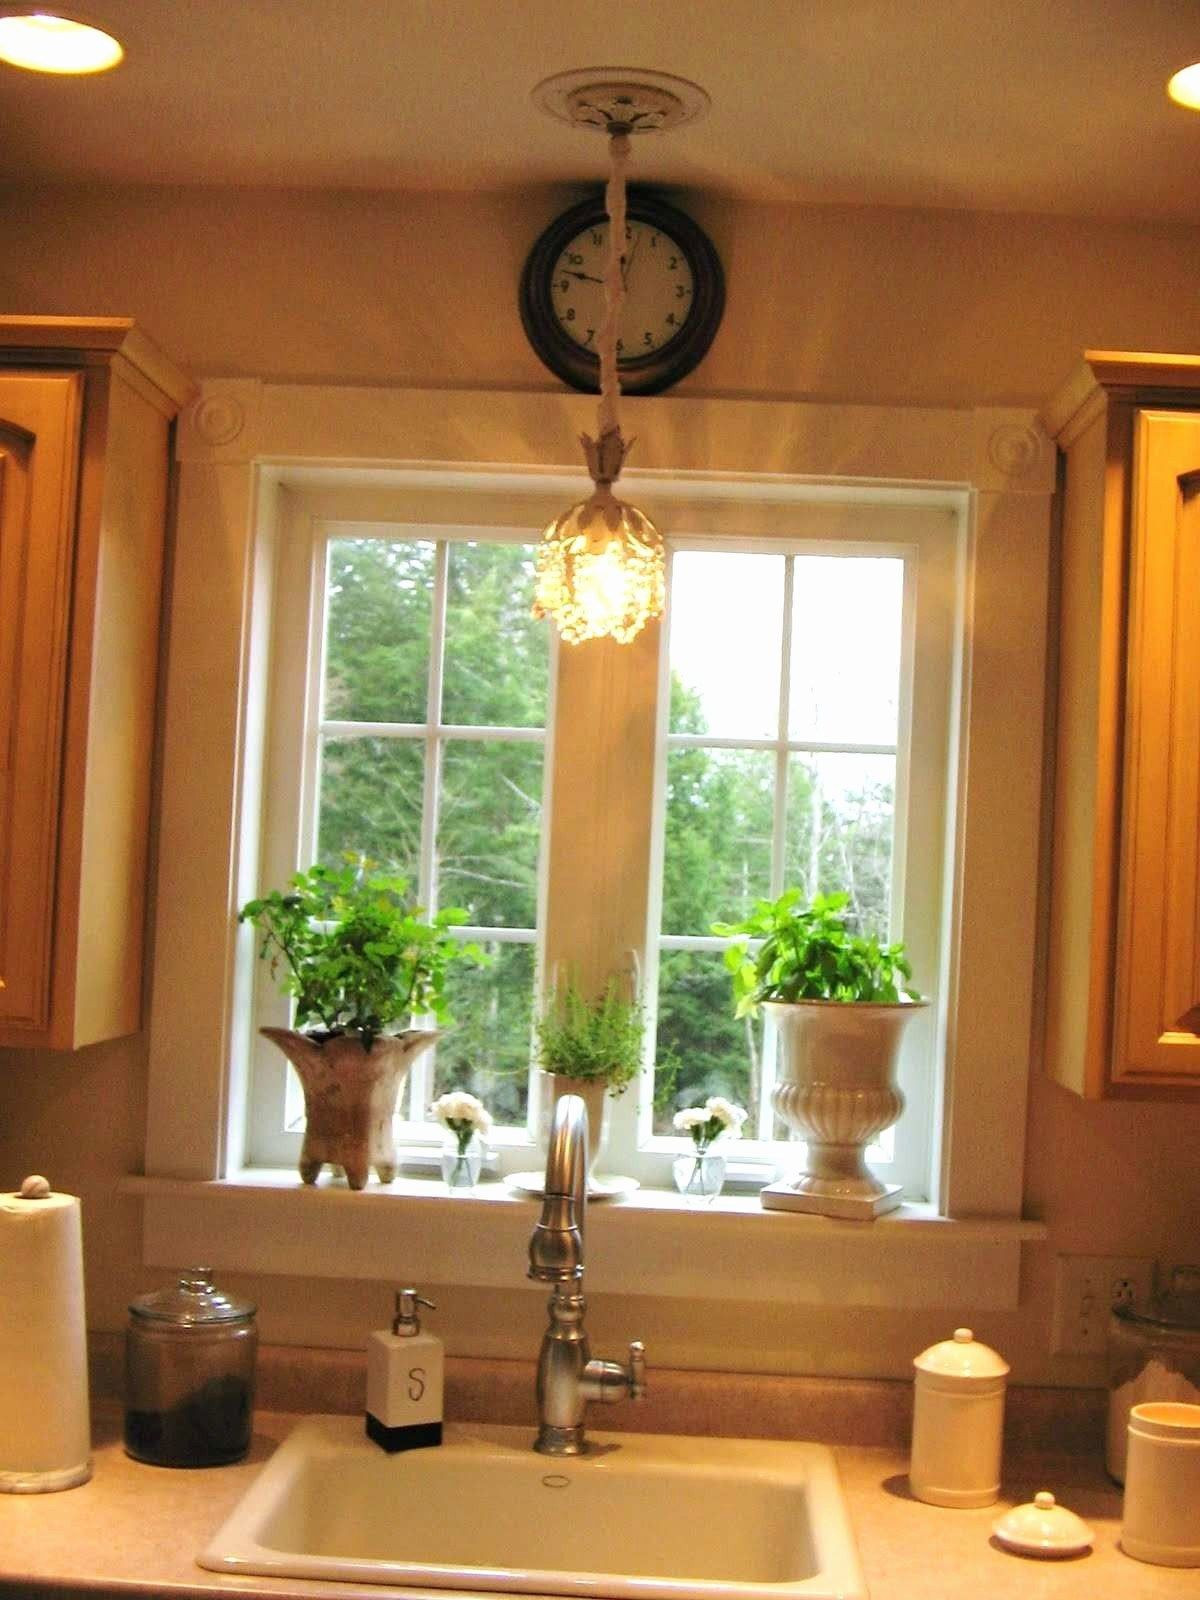 Kitchen Sink Light Fixtures
 Beautiful Hanging Lights Over Kitchen Sink With images